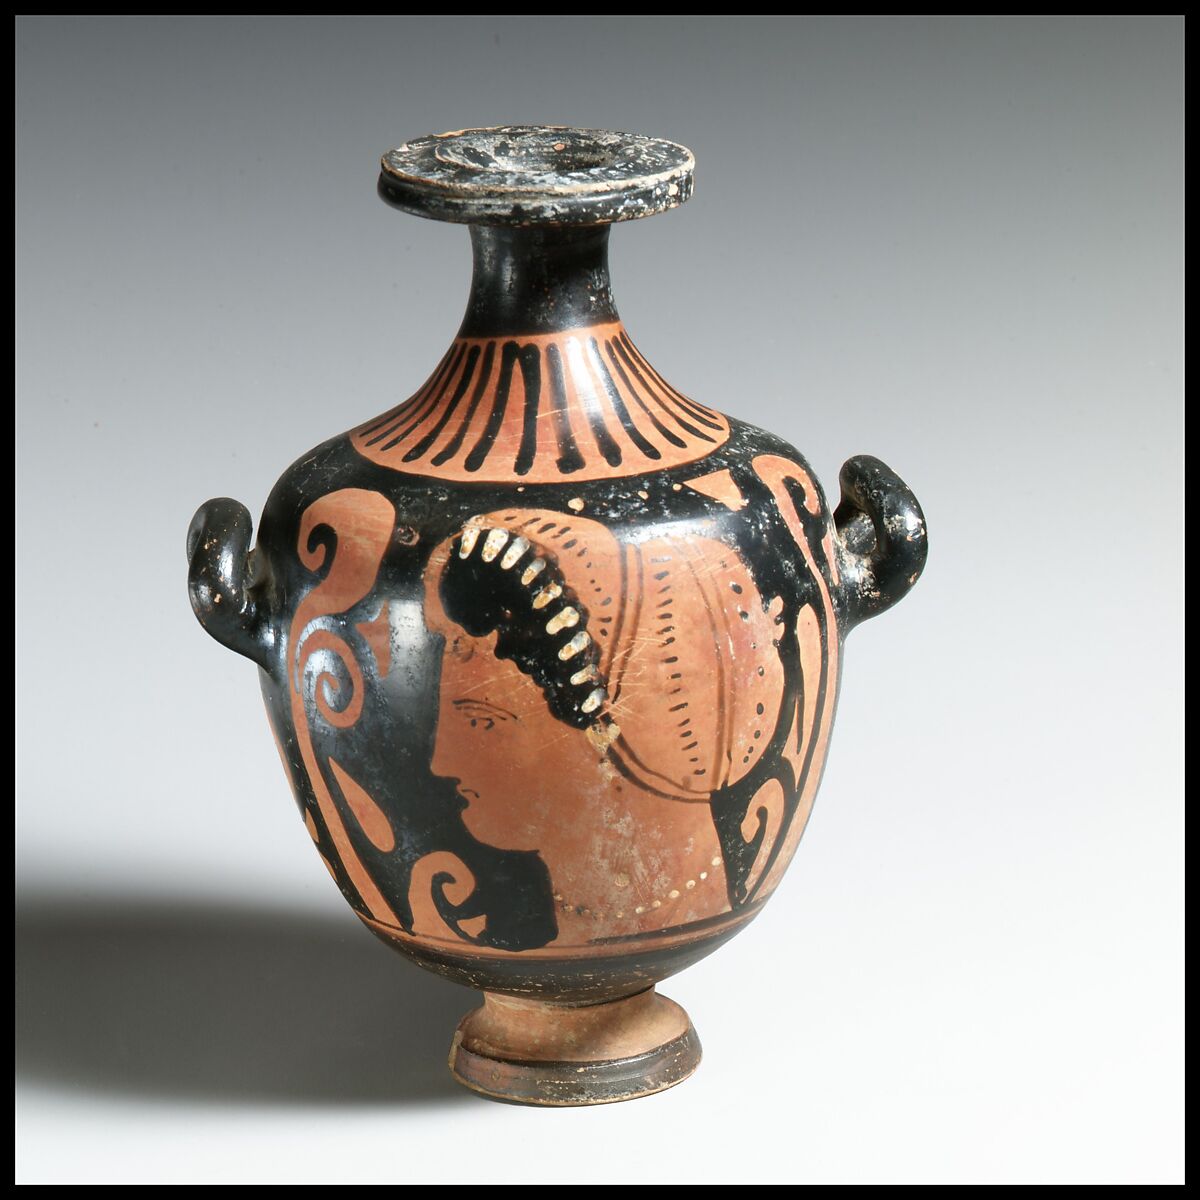 Hydria, Attributed to the Perth Group, Terracotta, Greek, South Italian, Apulian 